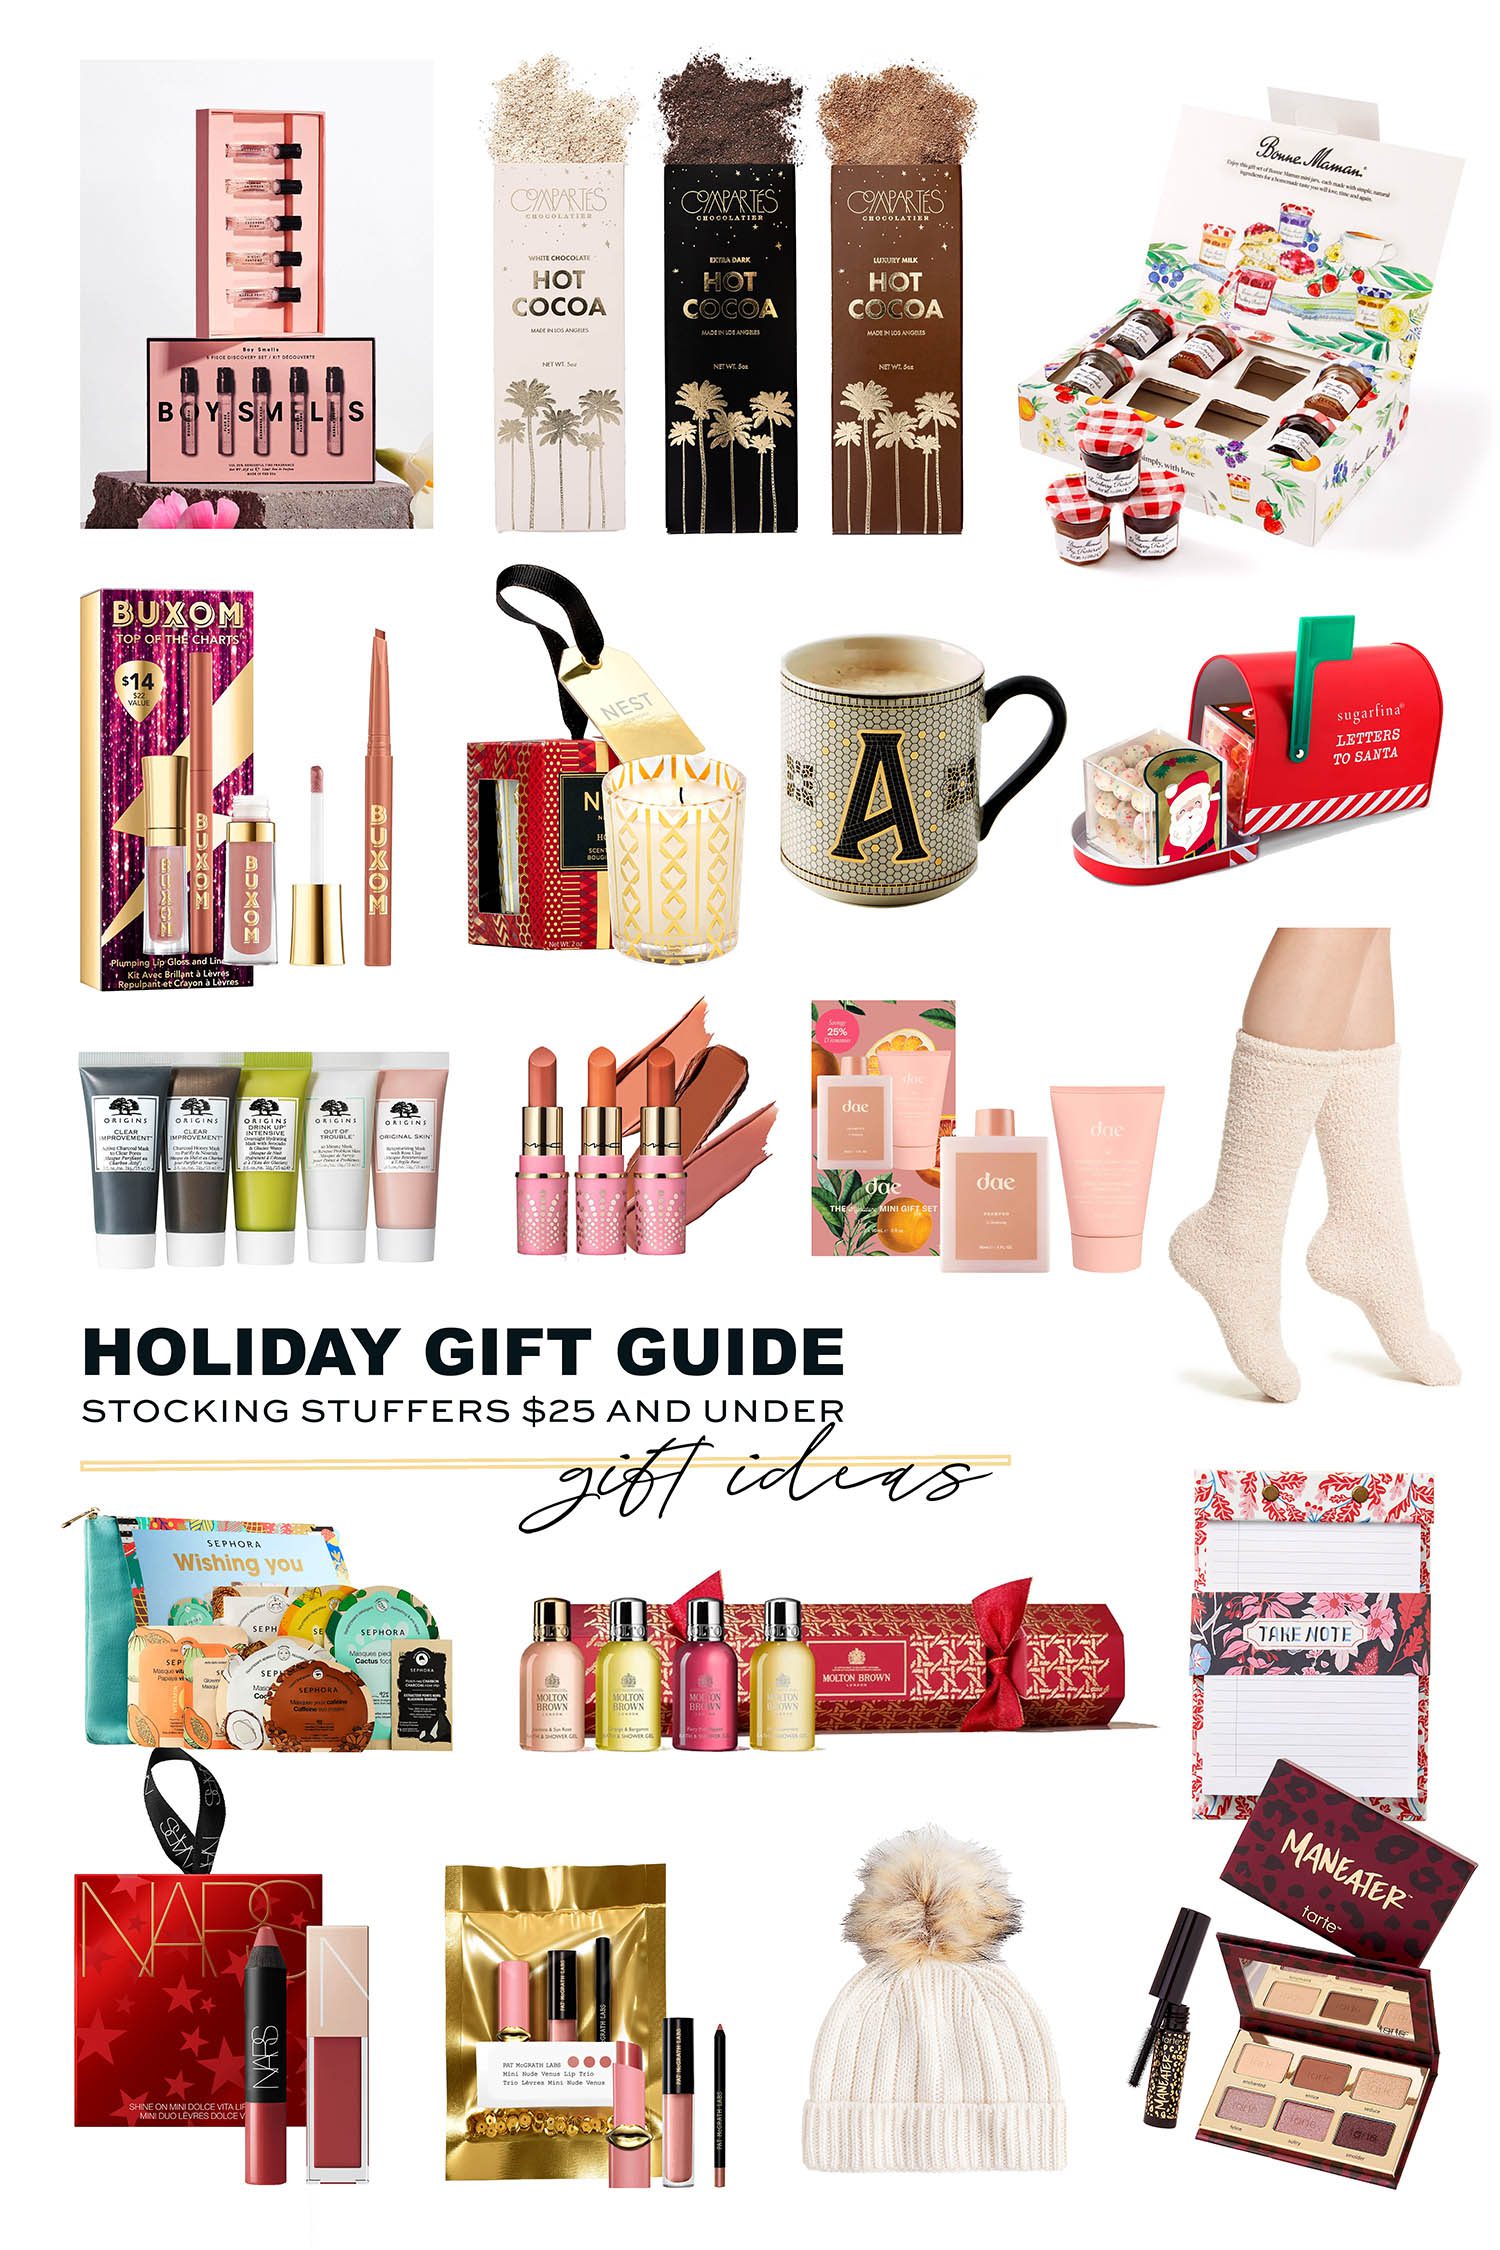 2022 gift guide, Gifts under $50,  gift guide